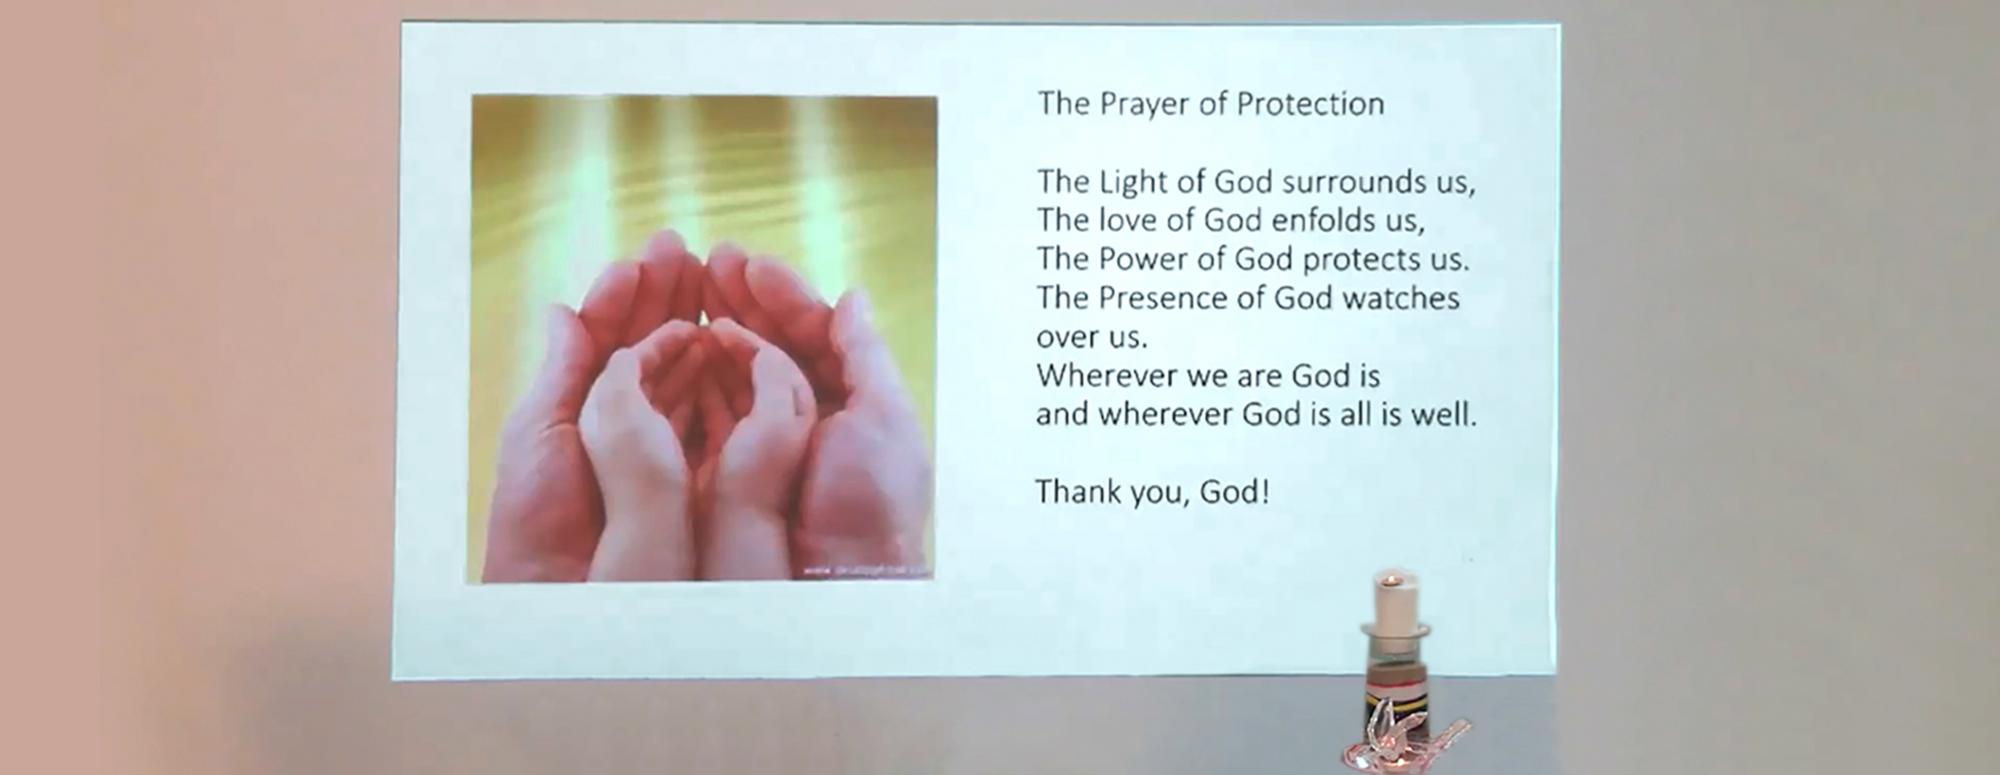 Words to Prayer of Protection